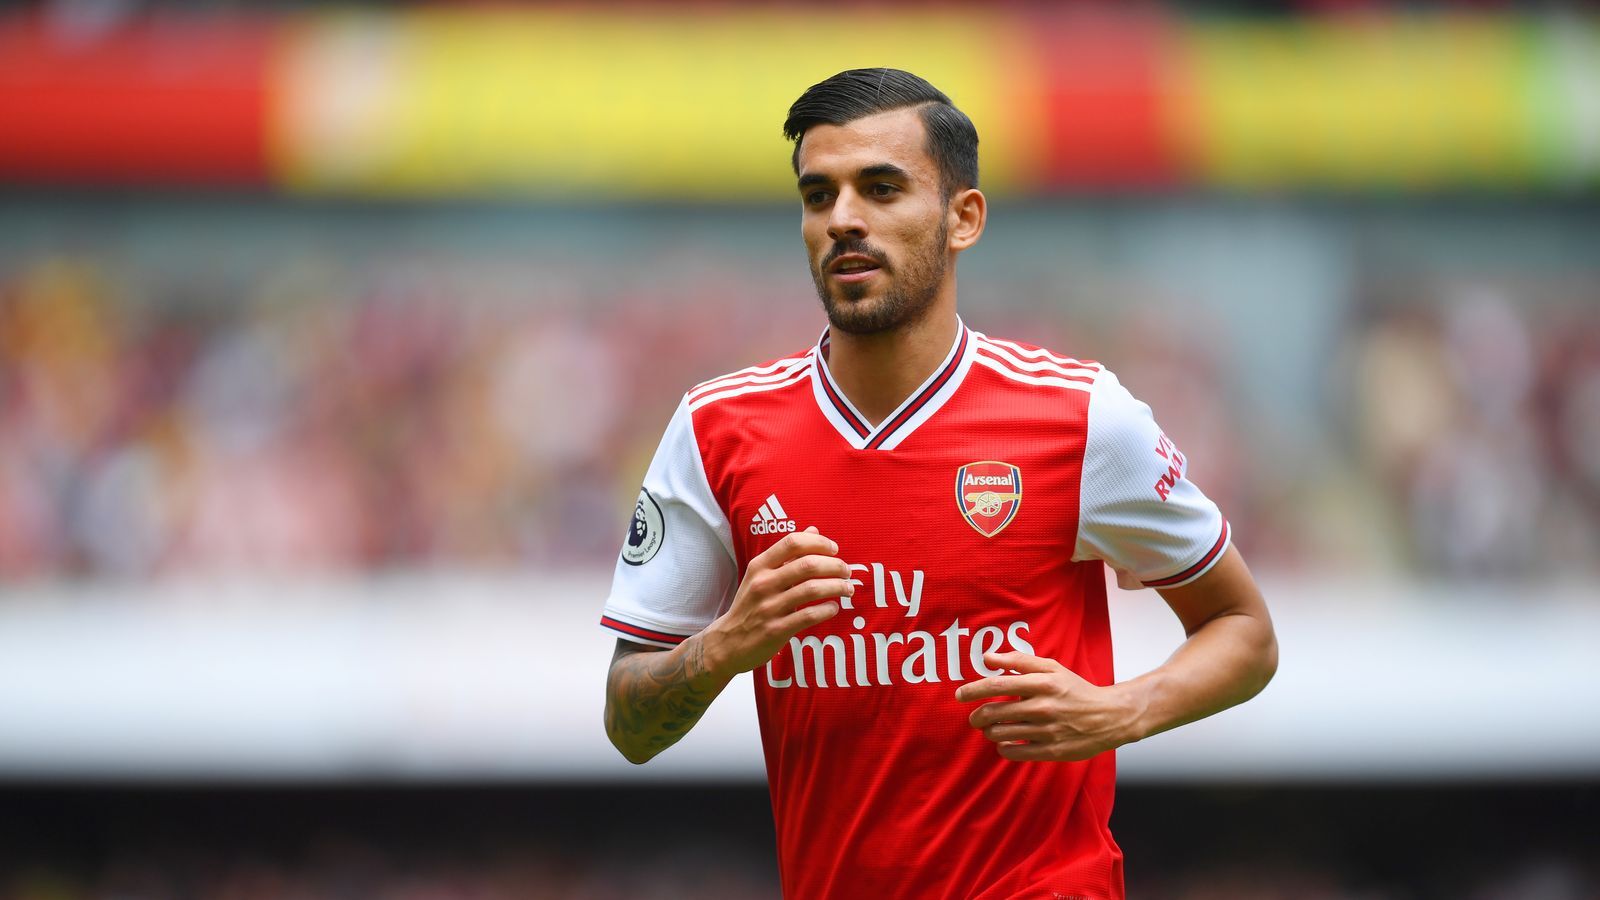 Dani Ceballos has started talking about his next move